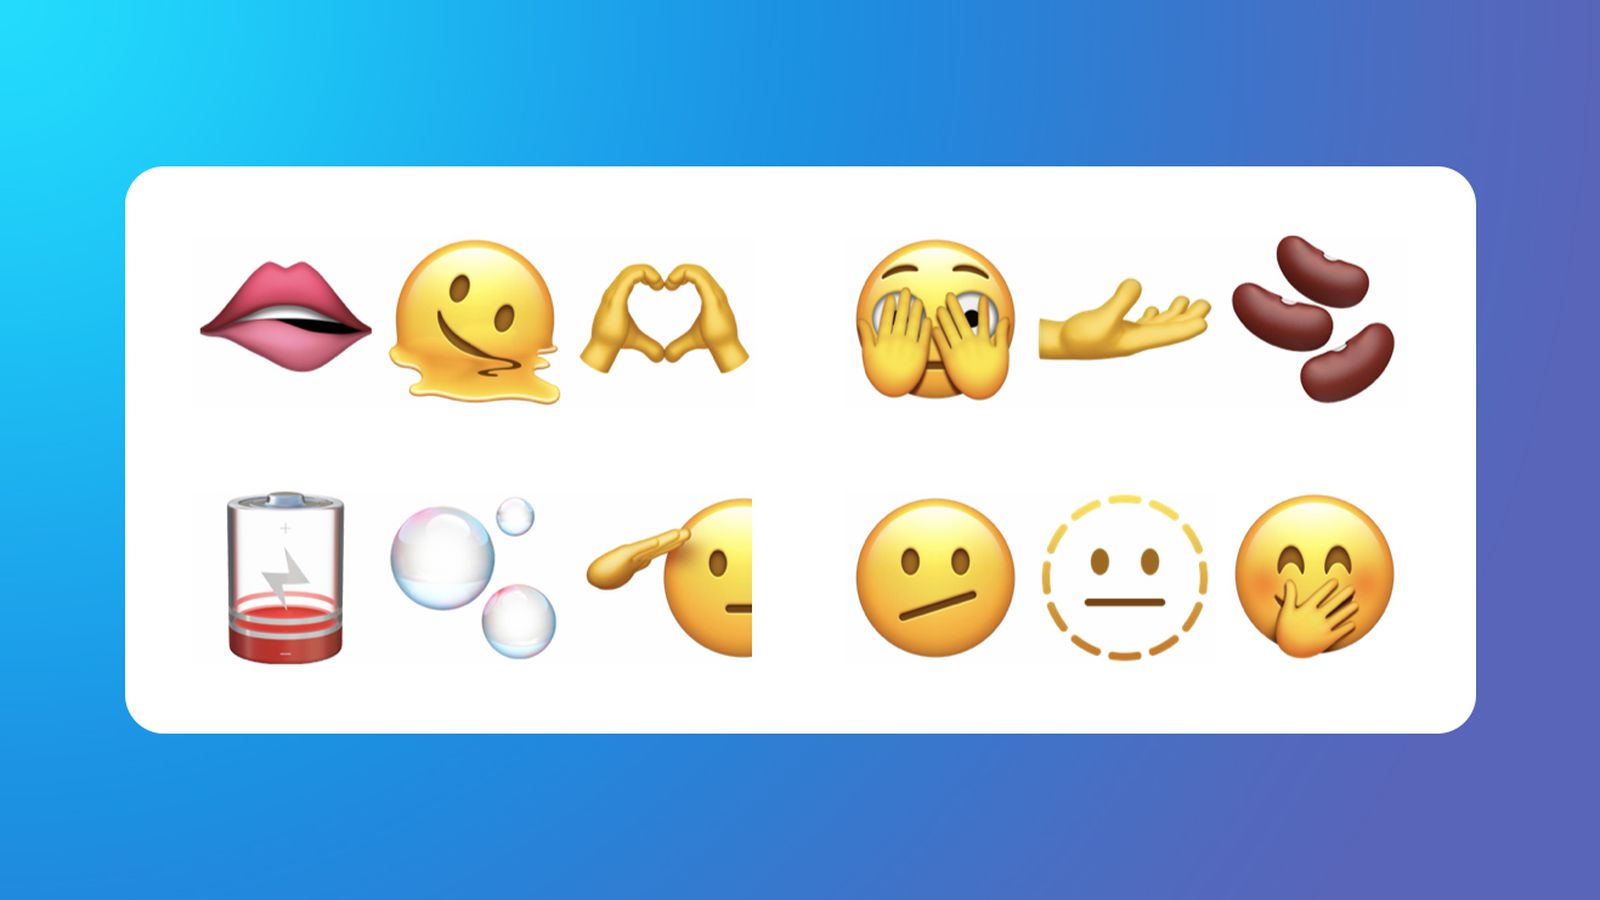 iOS 15.4 Adds New Emoji Like Melting Face, Biting Lip, Heart Hands, Troll and More